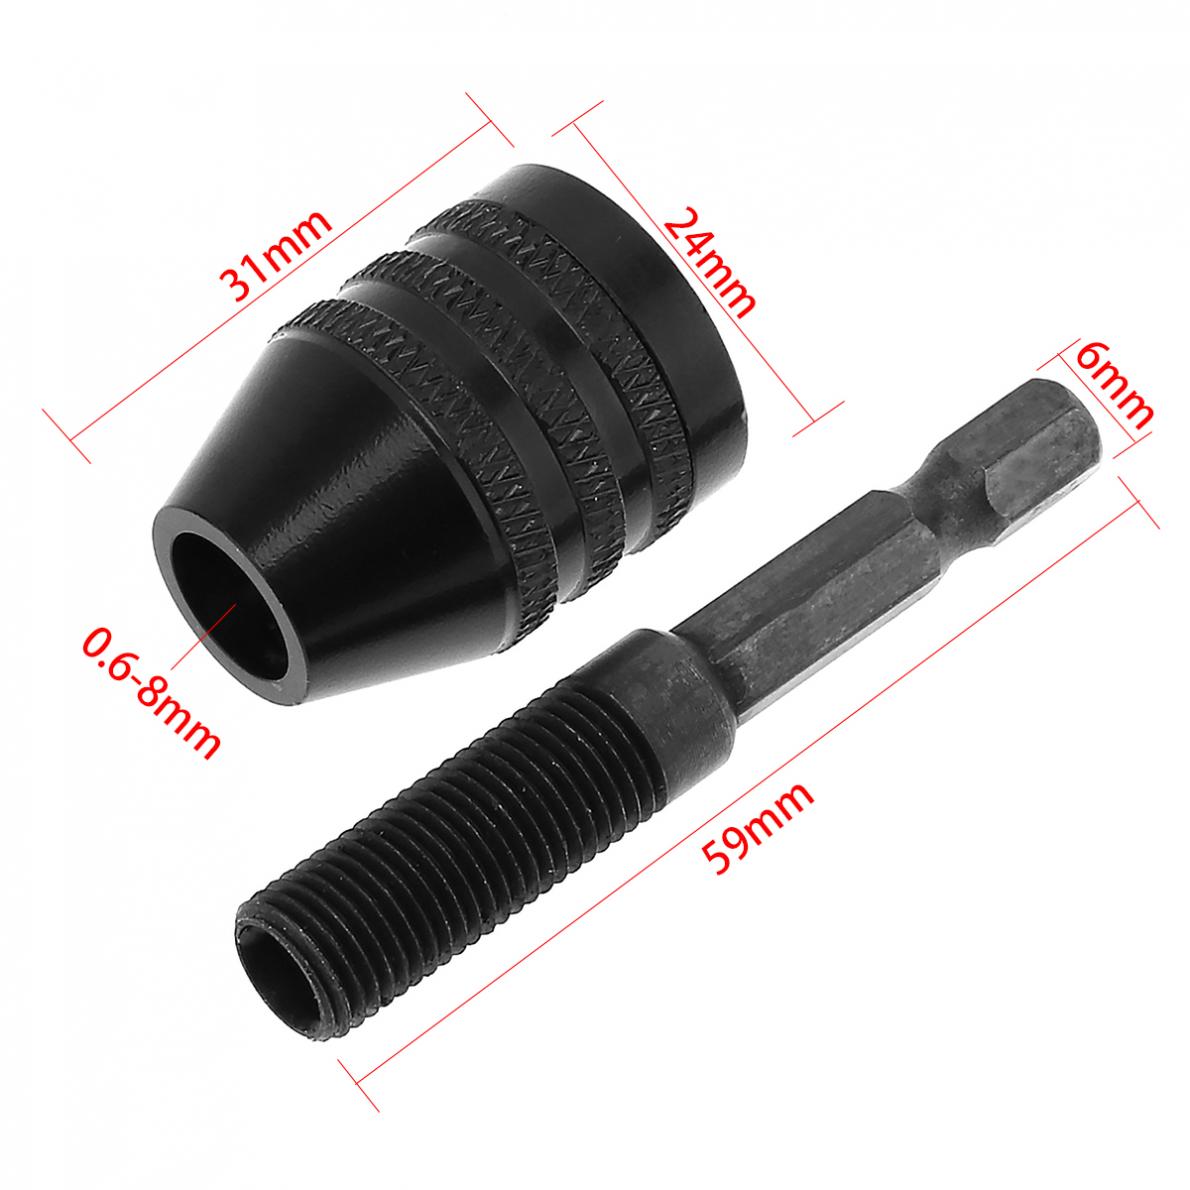 New 0.6-8mm Twist Drill Chuck Screwdriver Impact Driver Adapter with Hex Shank Three Claw for Electric Grinder